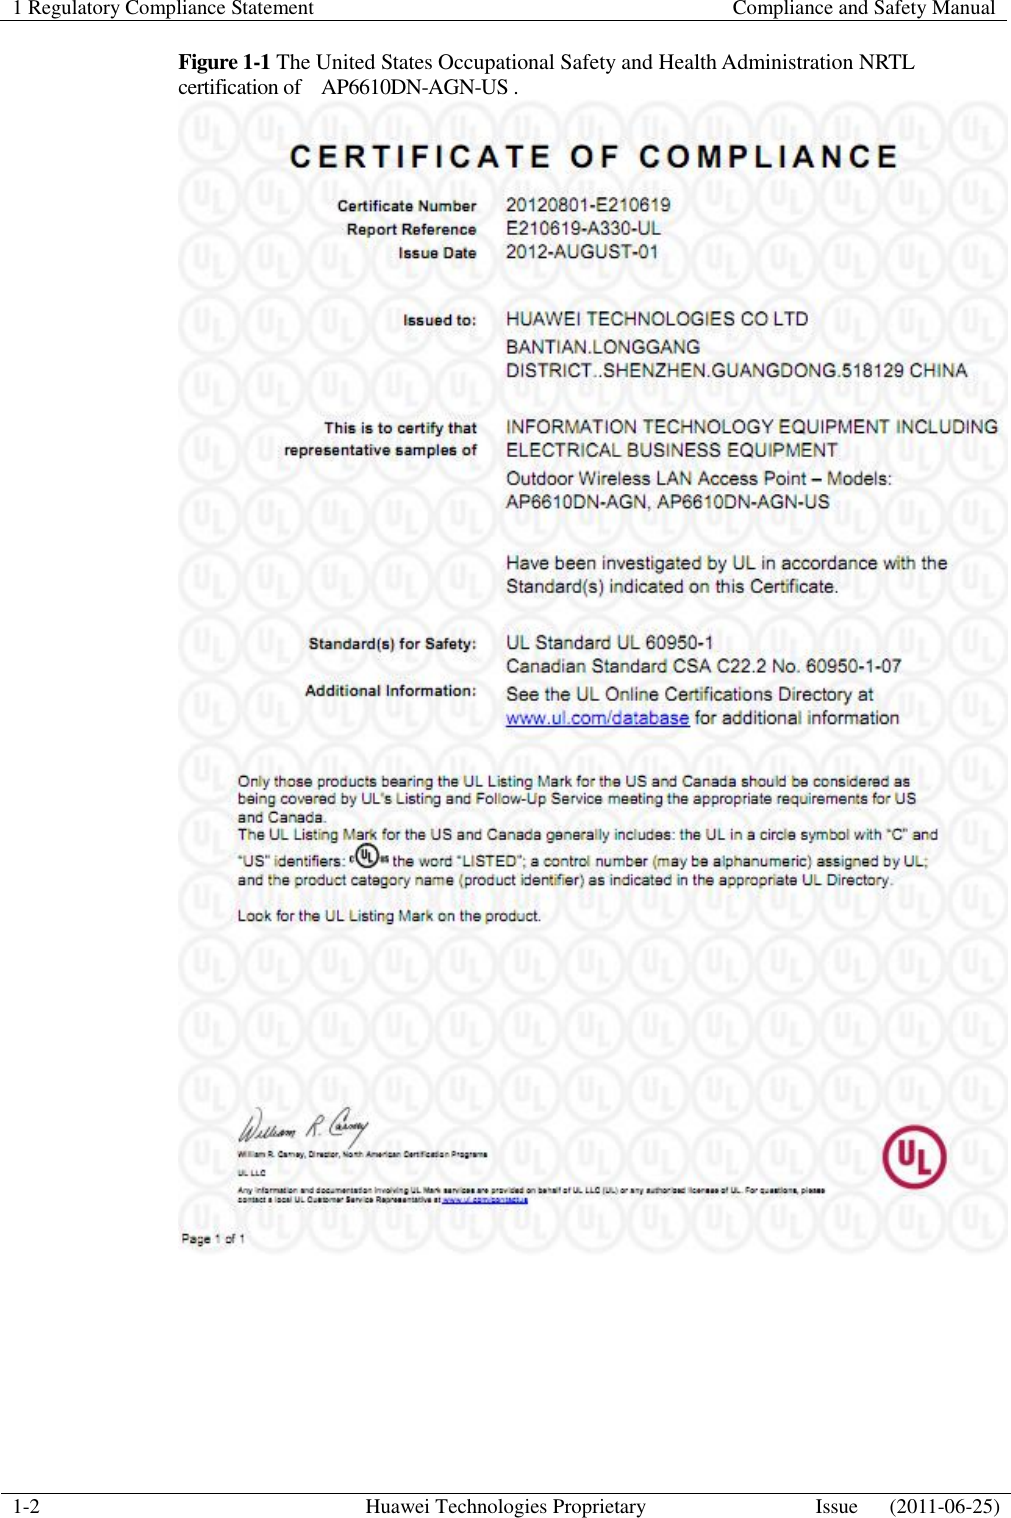 1 Regulatory Compliance Statement    Compliance and Safety Manual  1-2 Huawei Technologies Proprietary Issue      (2011-06-25)  Figure 1-1 The United States Occupational Safety and Health Administration NRTL certification of    AP6610DN-AGN-US .  